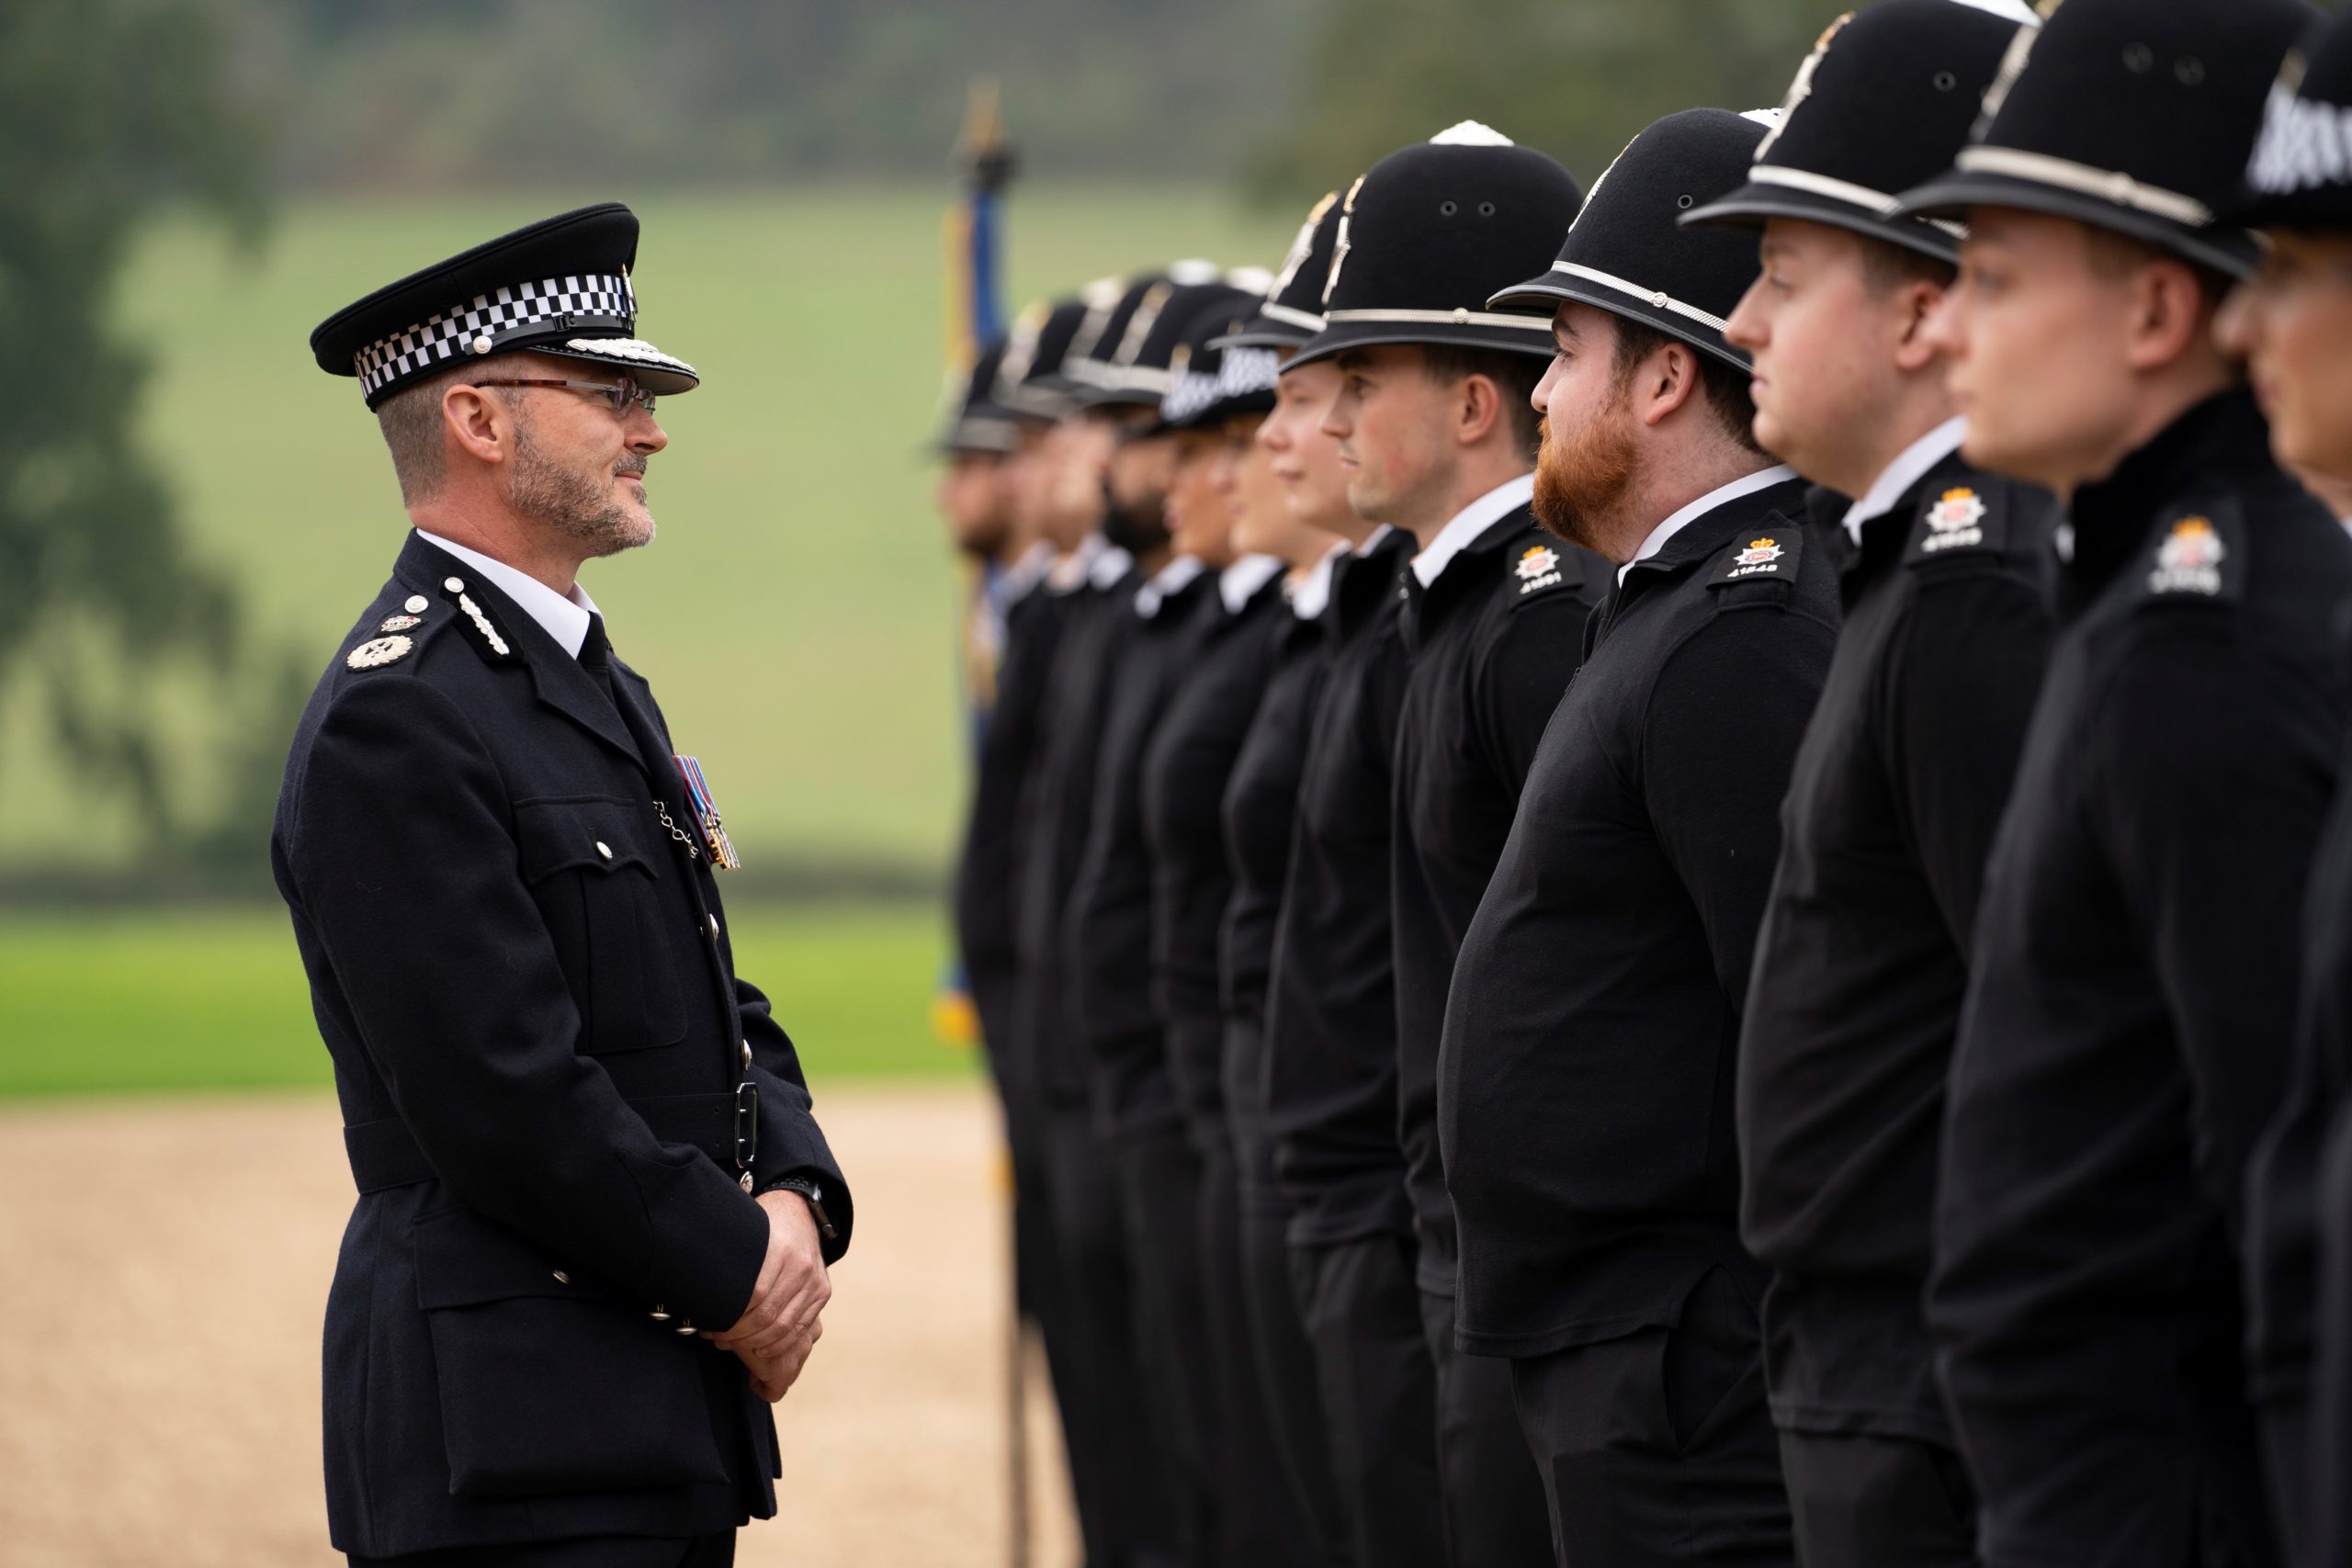 Chief Constable Gavin Stephens and officers, Surrey IPS parade